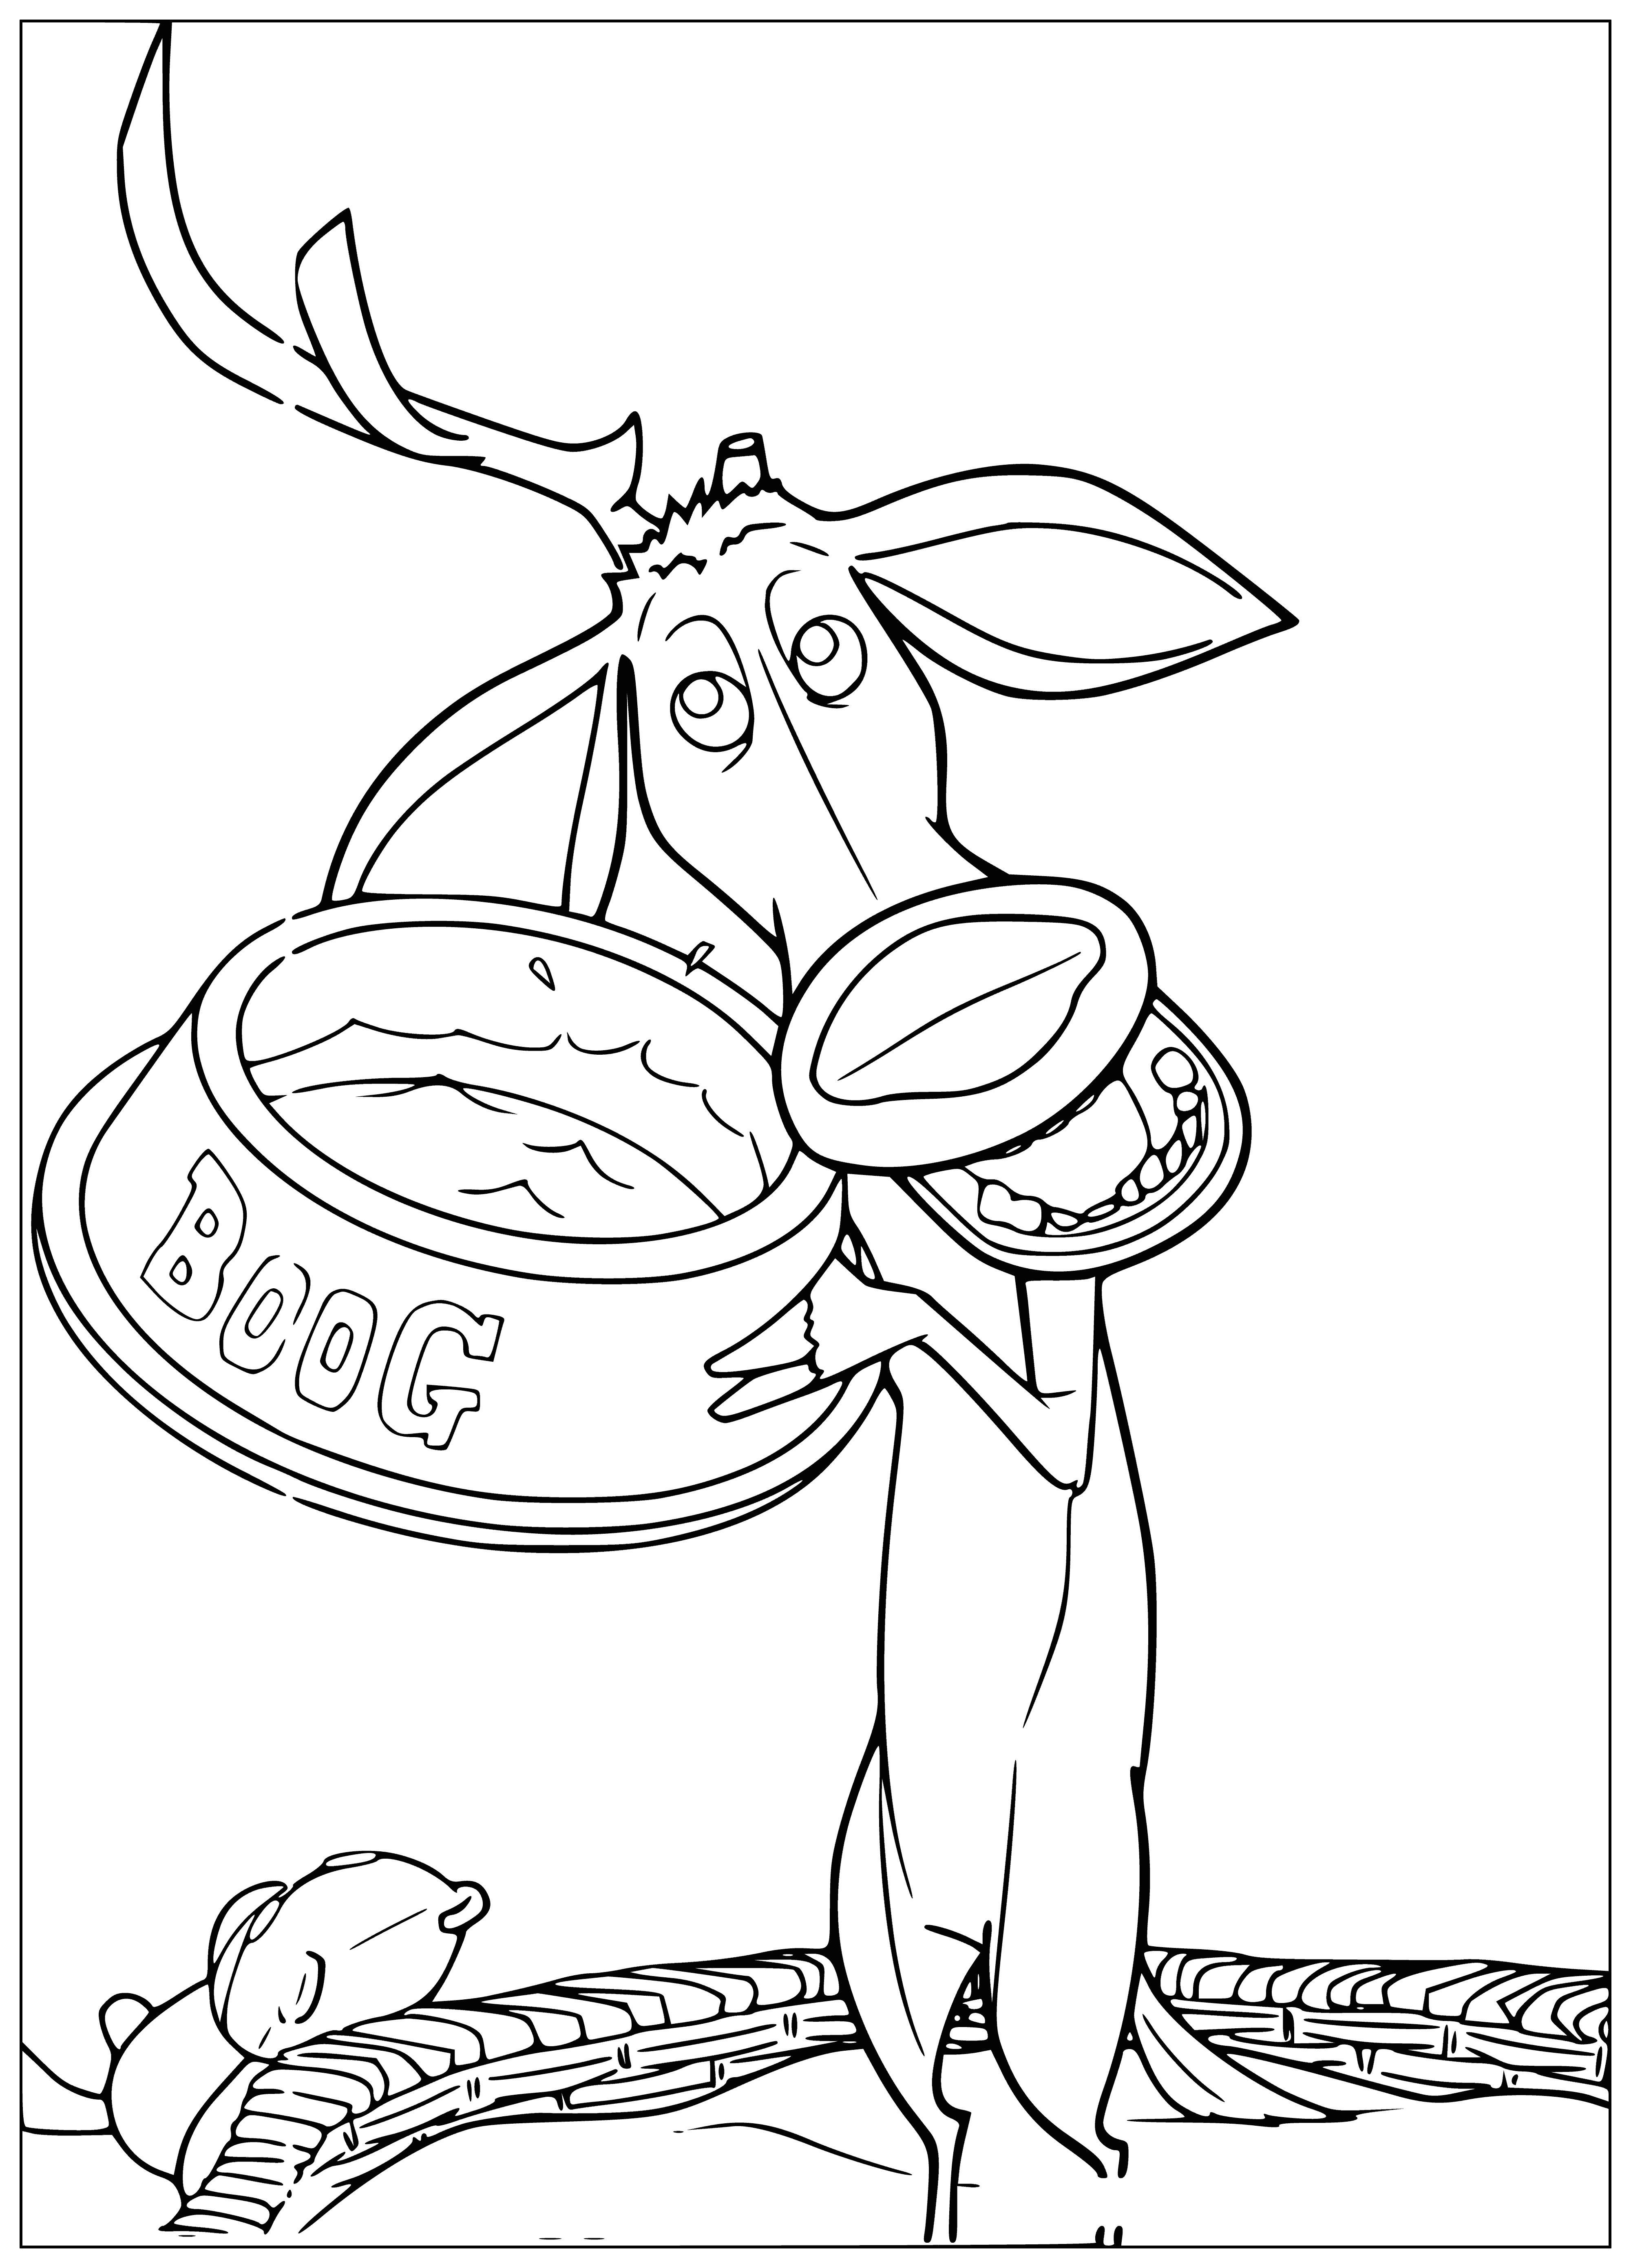 coloring page: Animals surround a scared meved deer, as if about to attack.